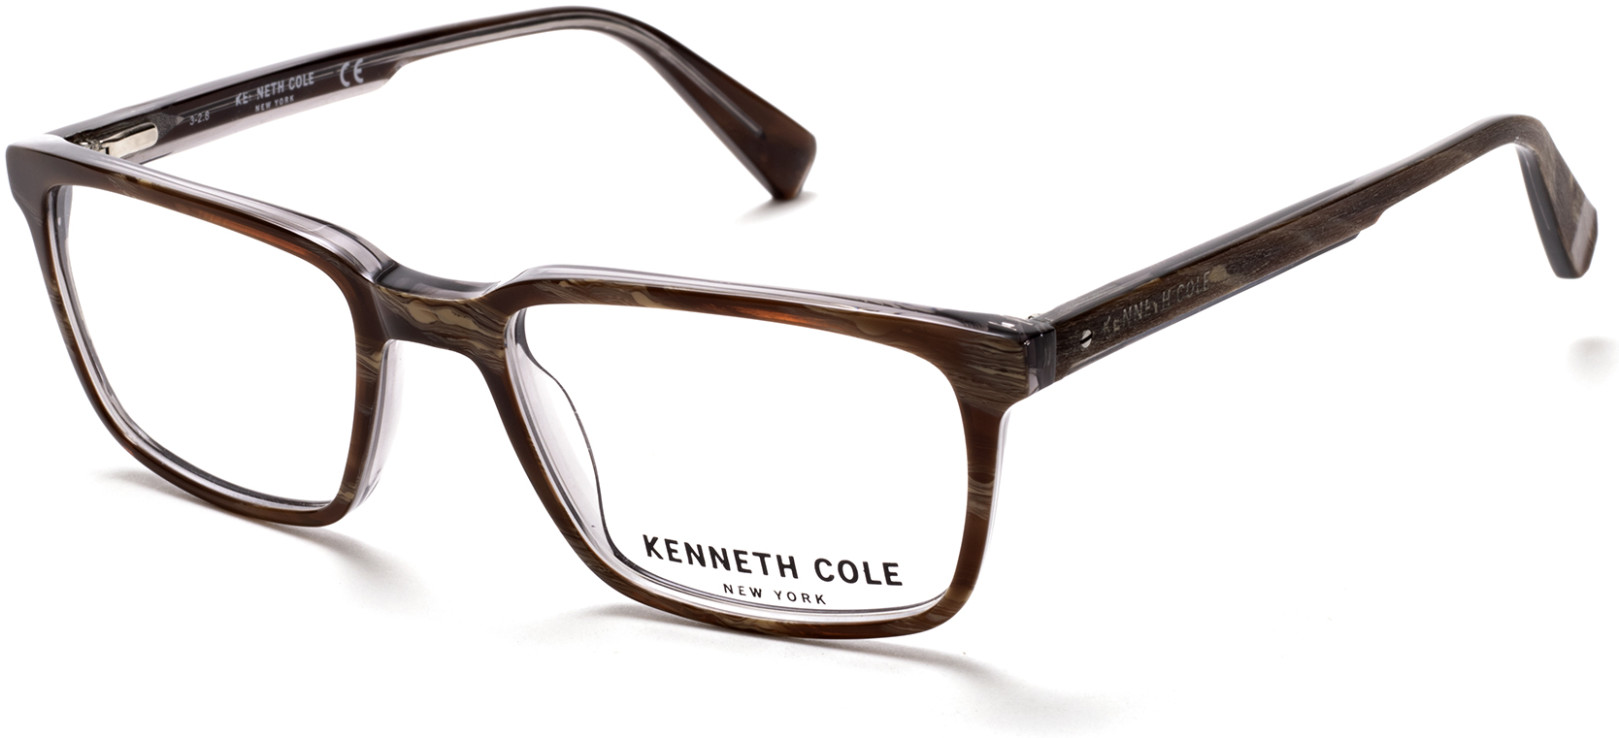 KENNETH COLE NY 0293 047